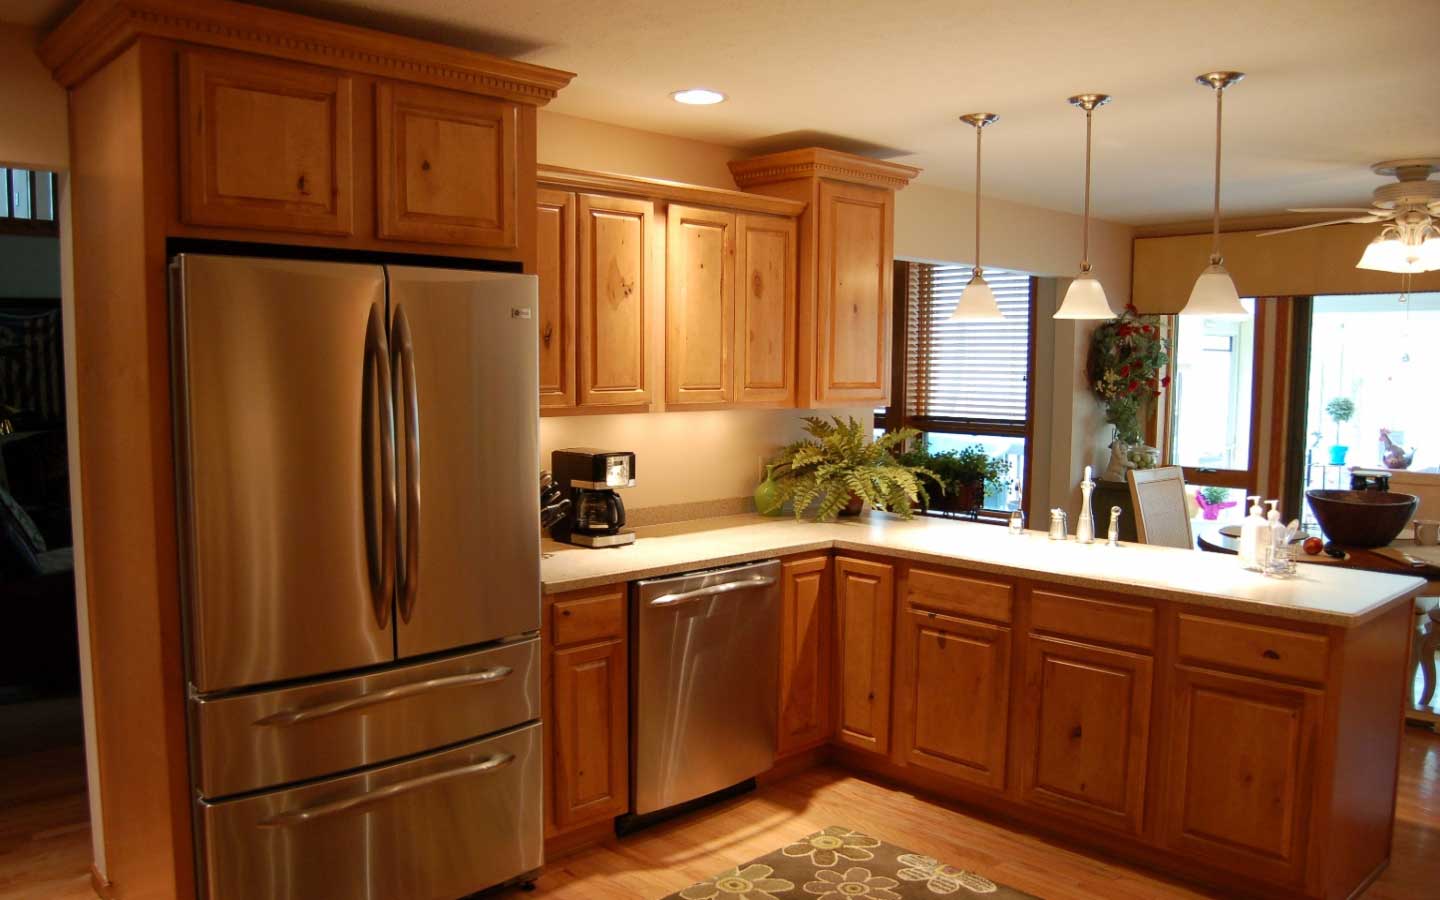 Kitchen Remodel White Minimalist Kitchen Remodel Ideas With White Granite Countertop Design And Luxury Pendant Lamps Idea Also Traditional Kitchen Cabinet Designs Plus Rustic Teak Wooden Flooring Idea Kitchen Most Popular Kitchen Layout To Emulate Your Own After